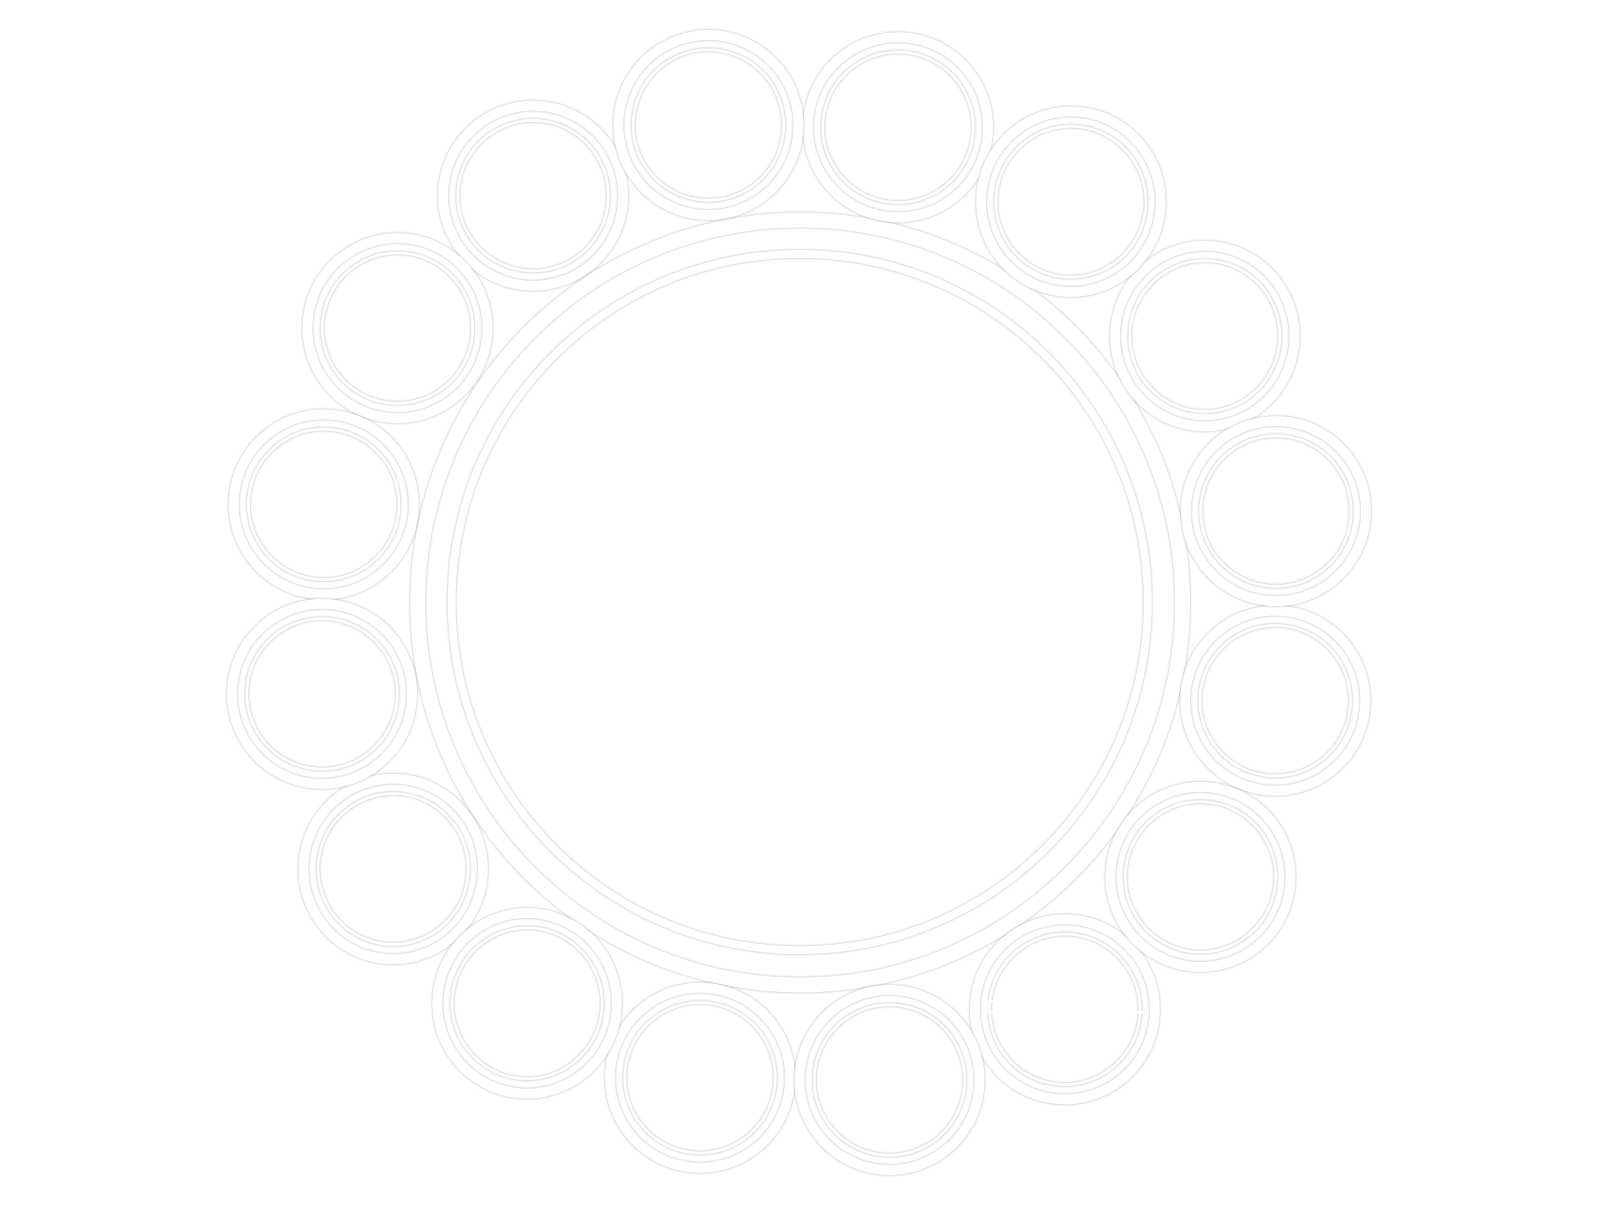 Infographic - Conditions ABA Therapy Can Treat